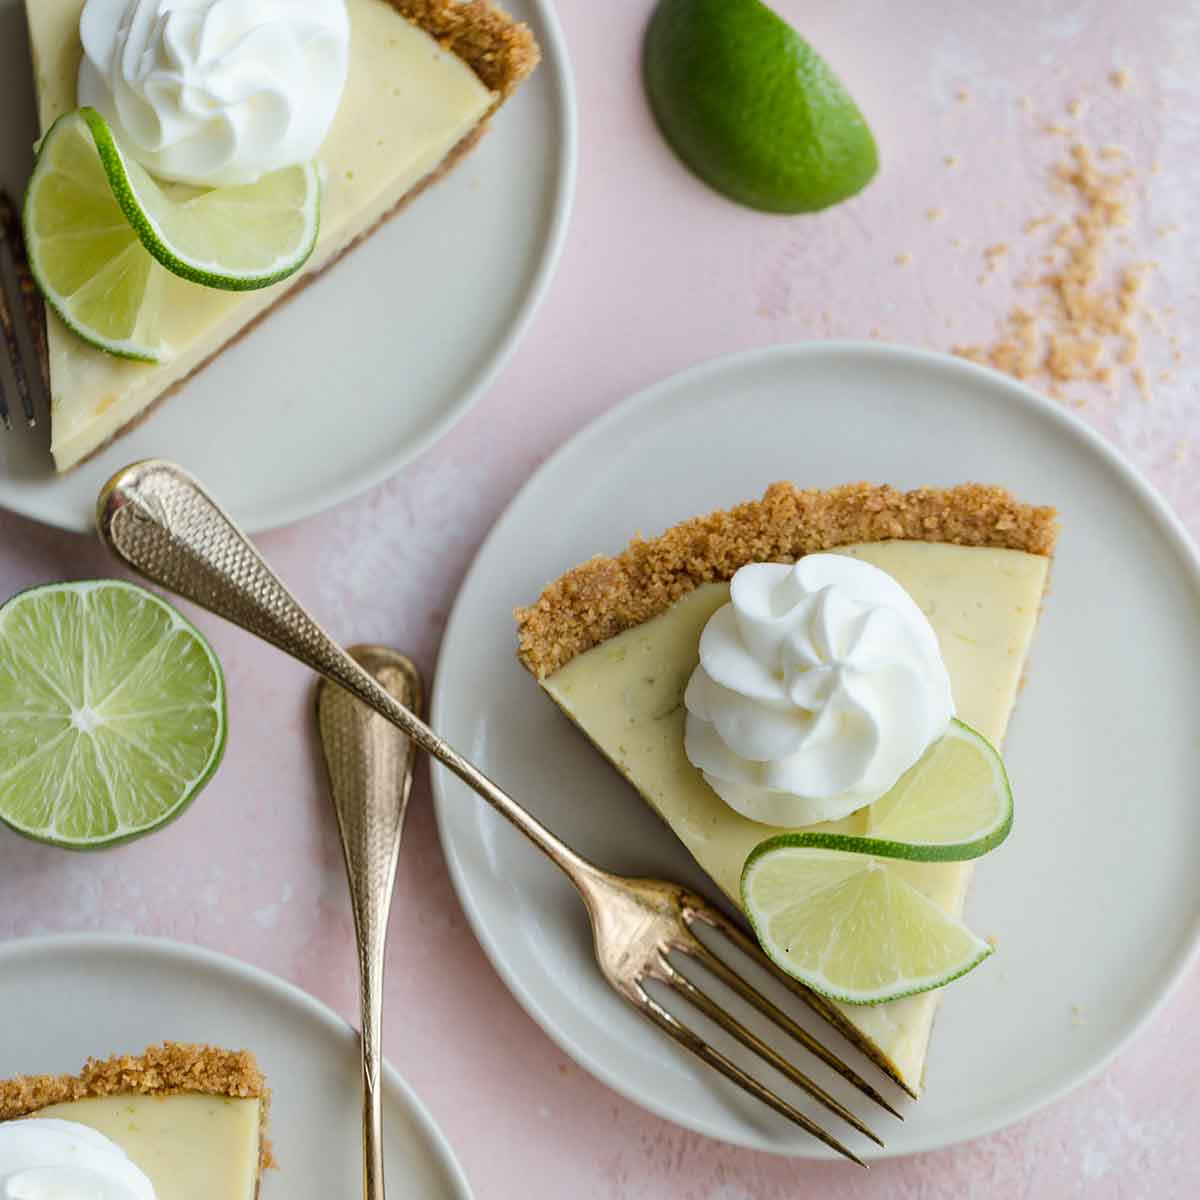 Slices of key lime pie on dessert plates topped with whipped cream and lime slices.